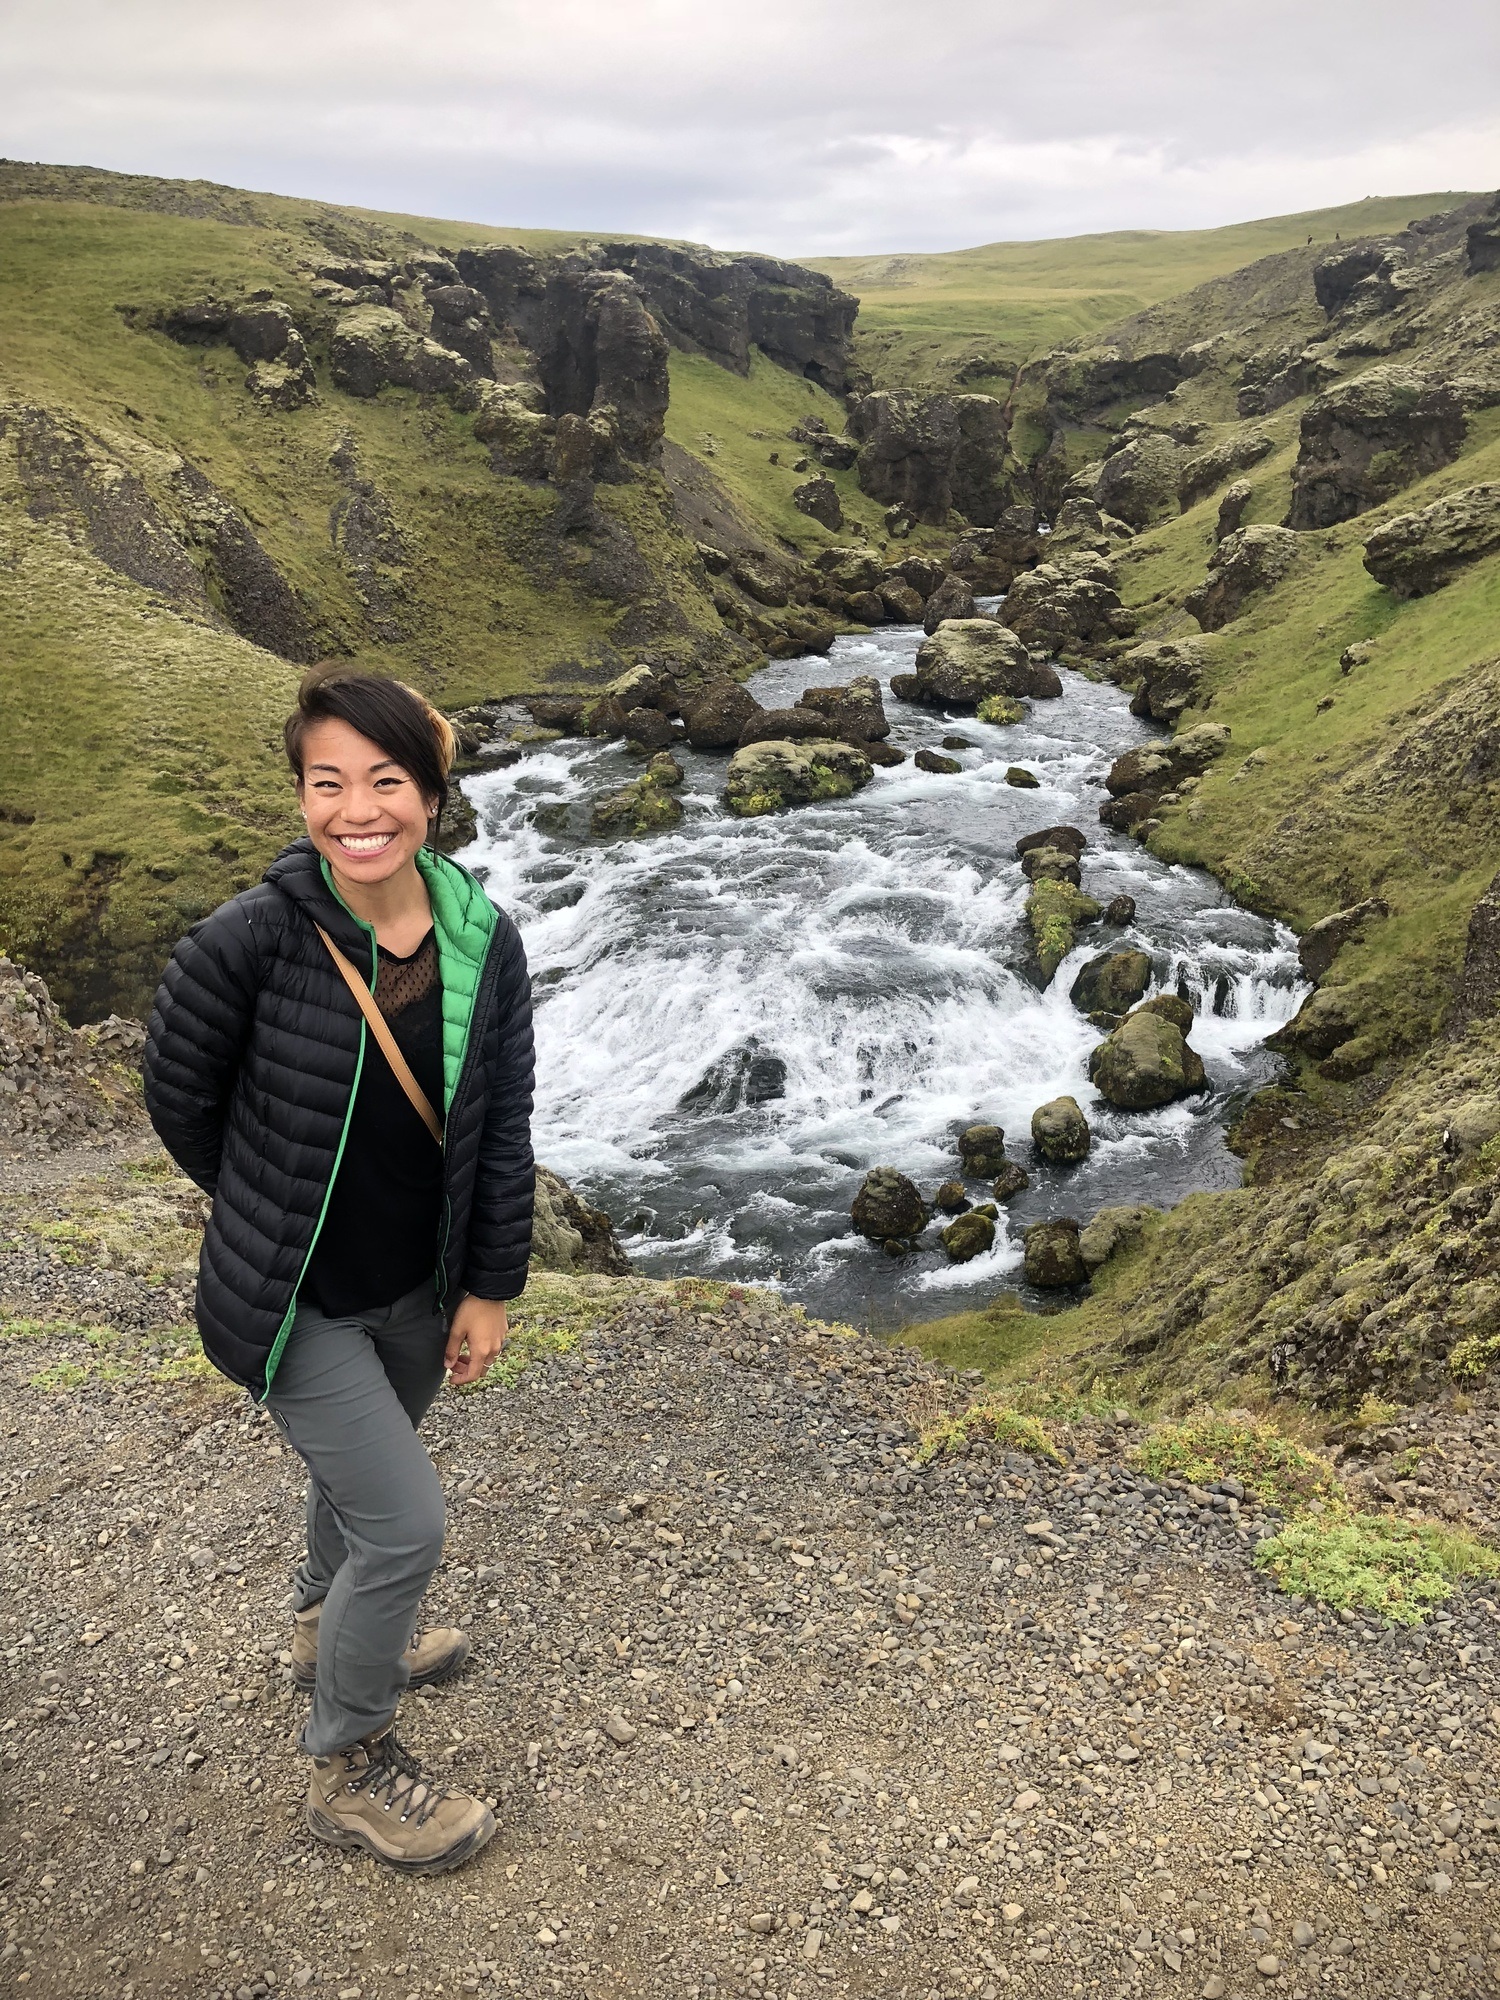 Posing by a large river in Iceland